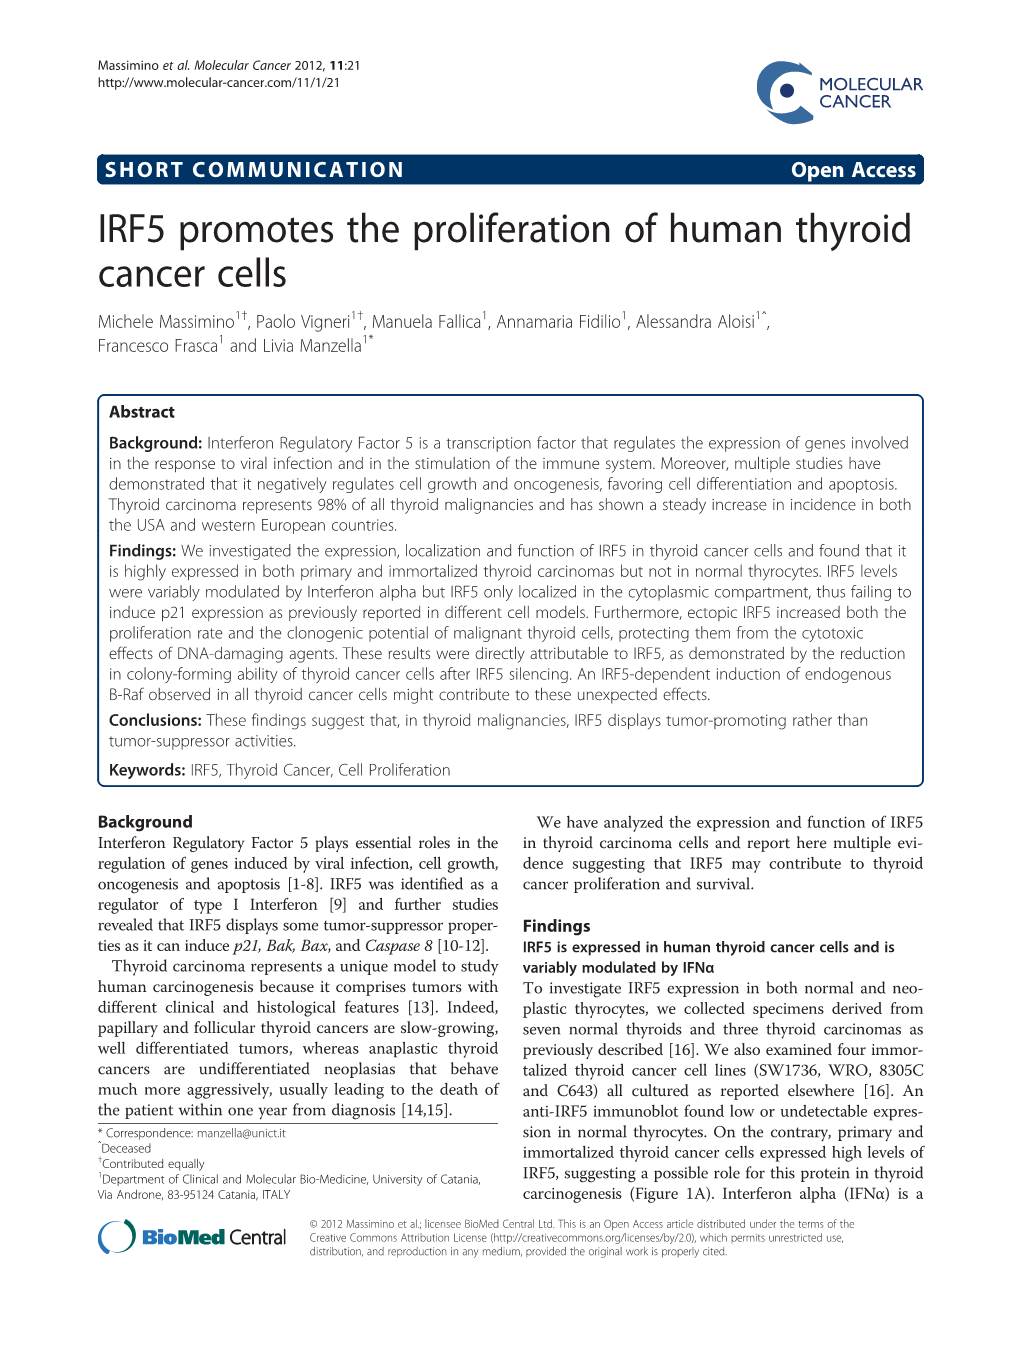 IRF5 Promotes the Proliferation of Human Thyroid Cancer Cells